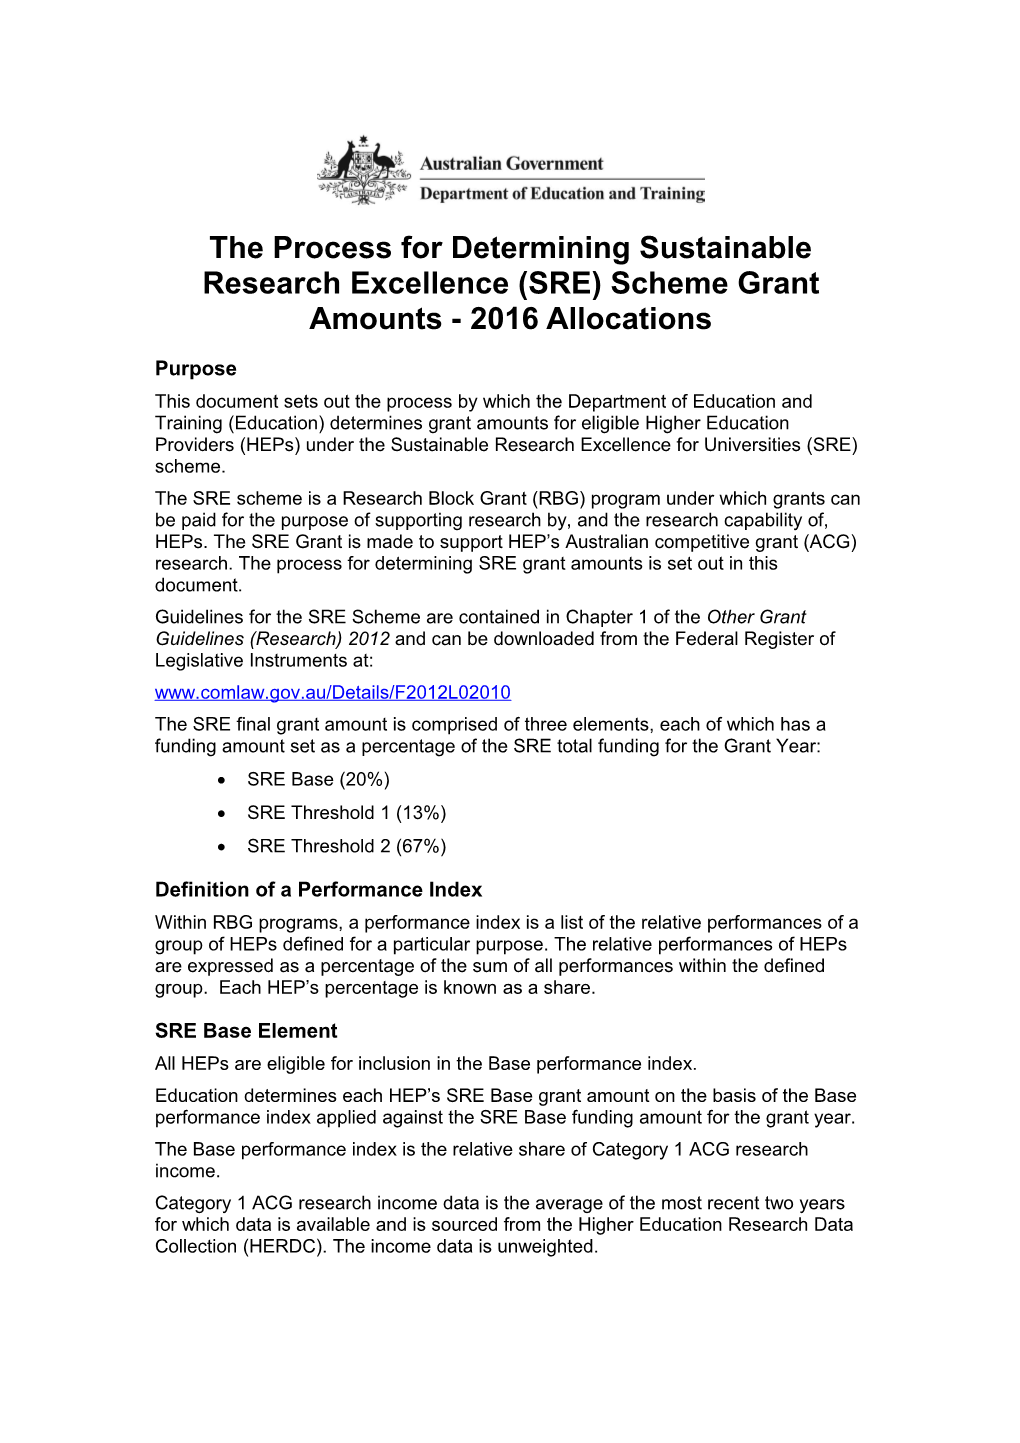 The Process for Determining Sustainable Research Excellence (SRE) Scheme Grant